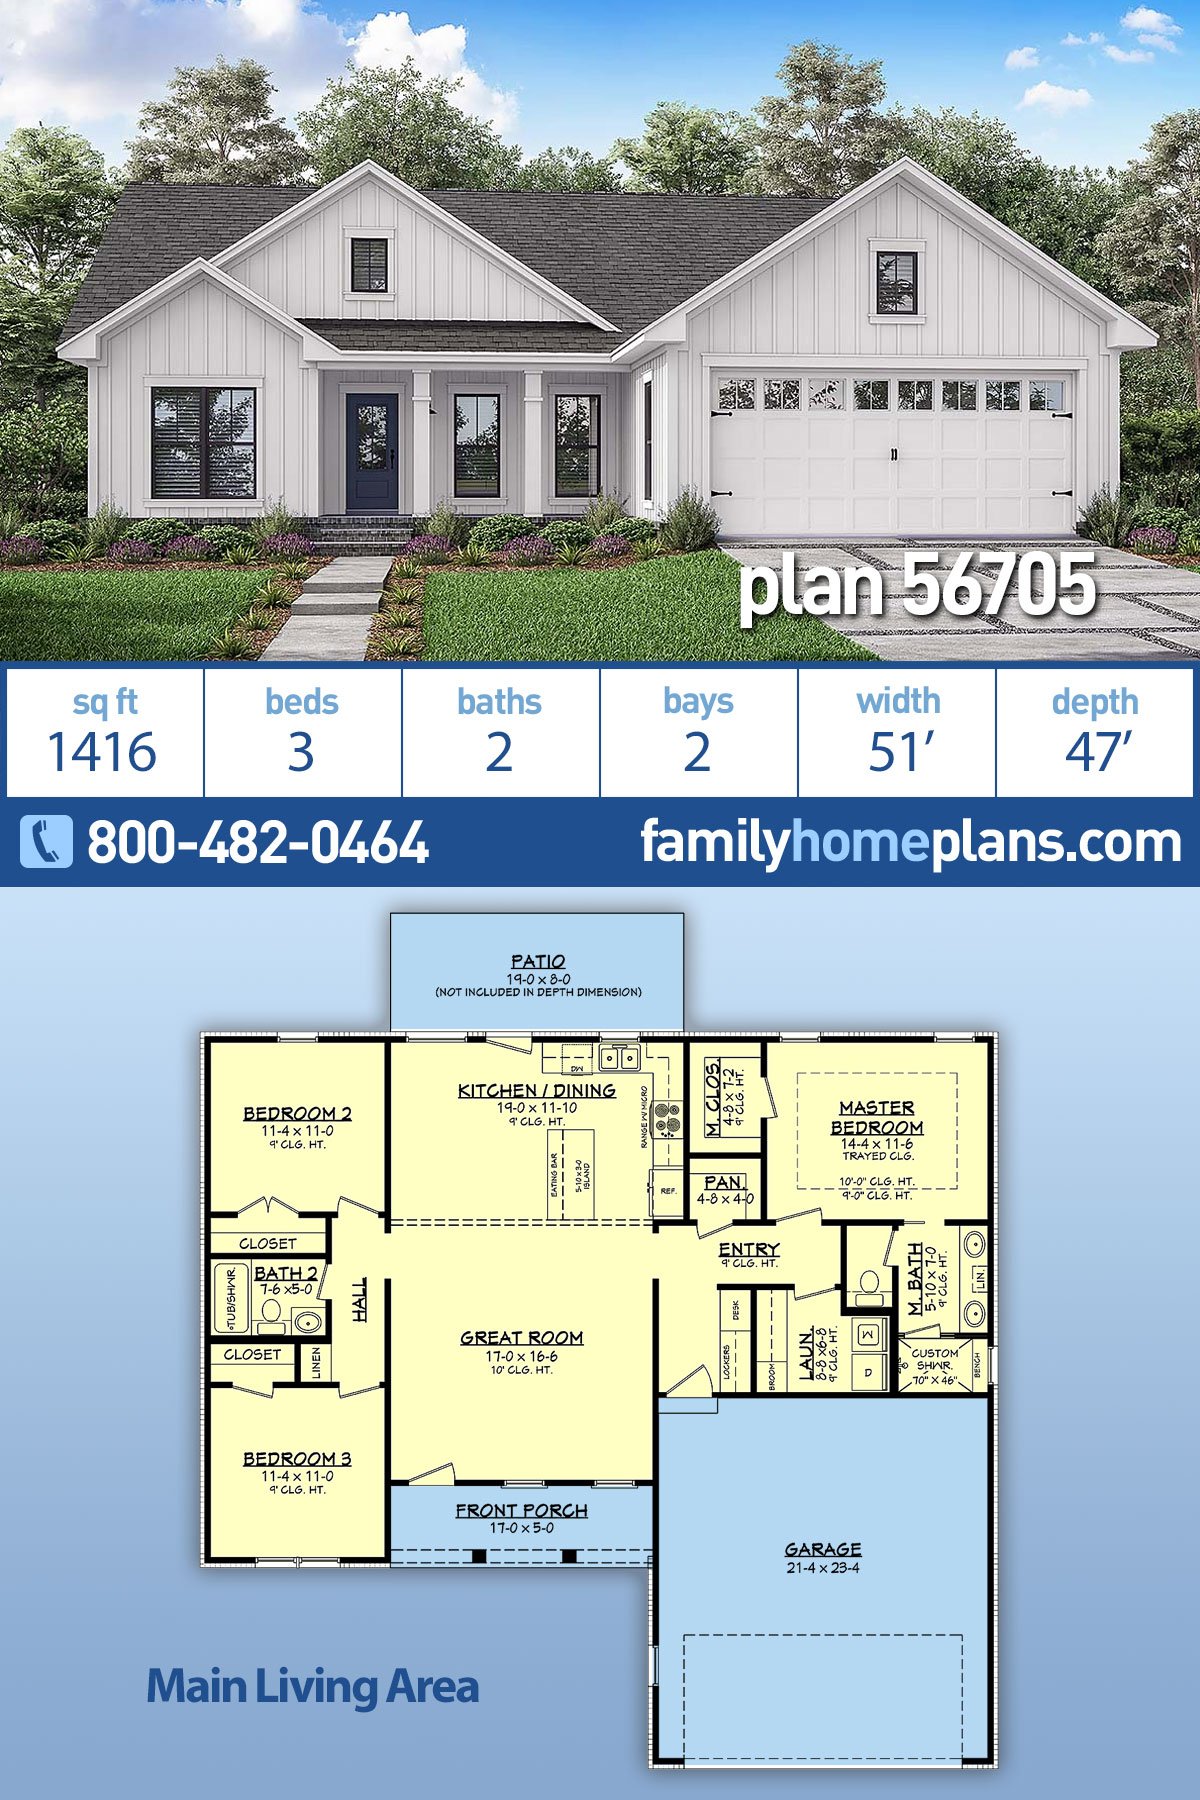 Country, Farmhouse, Traditional House Plan 56705 with 3 Beds, 2 Baths, 2 Car Garage